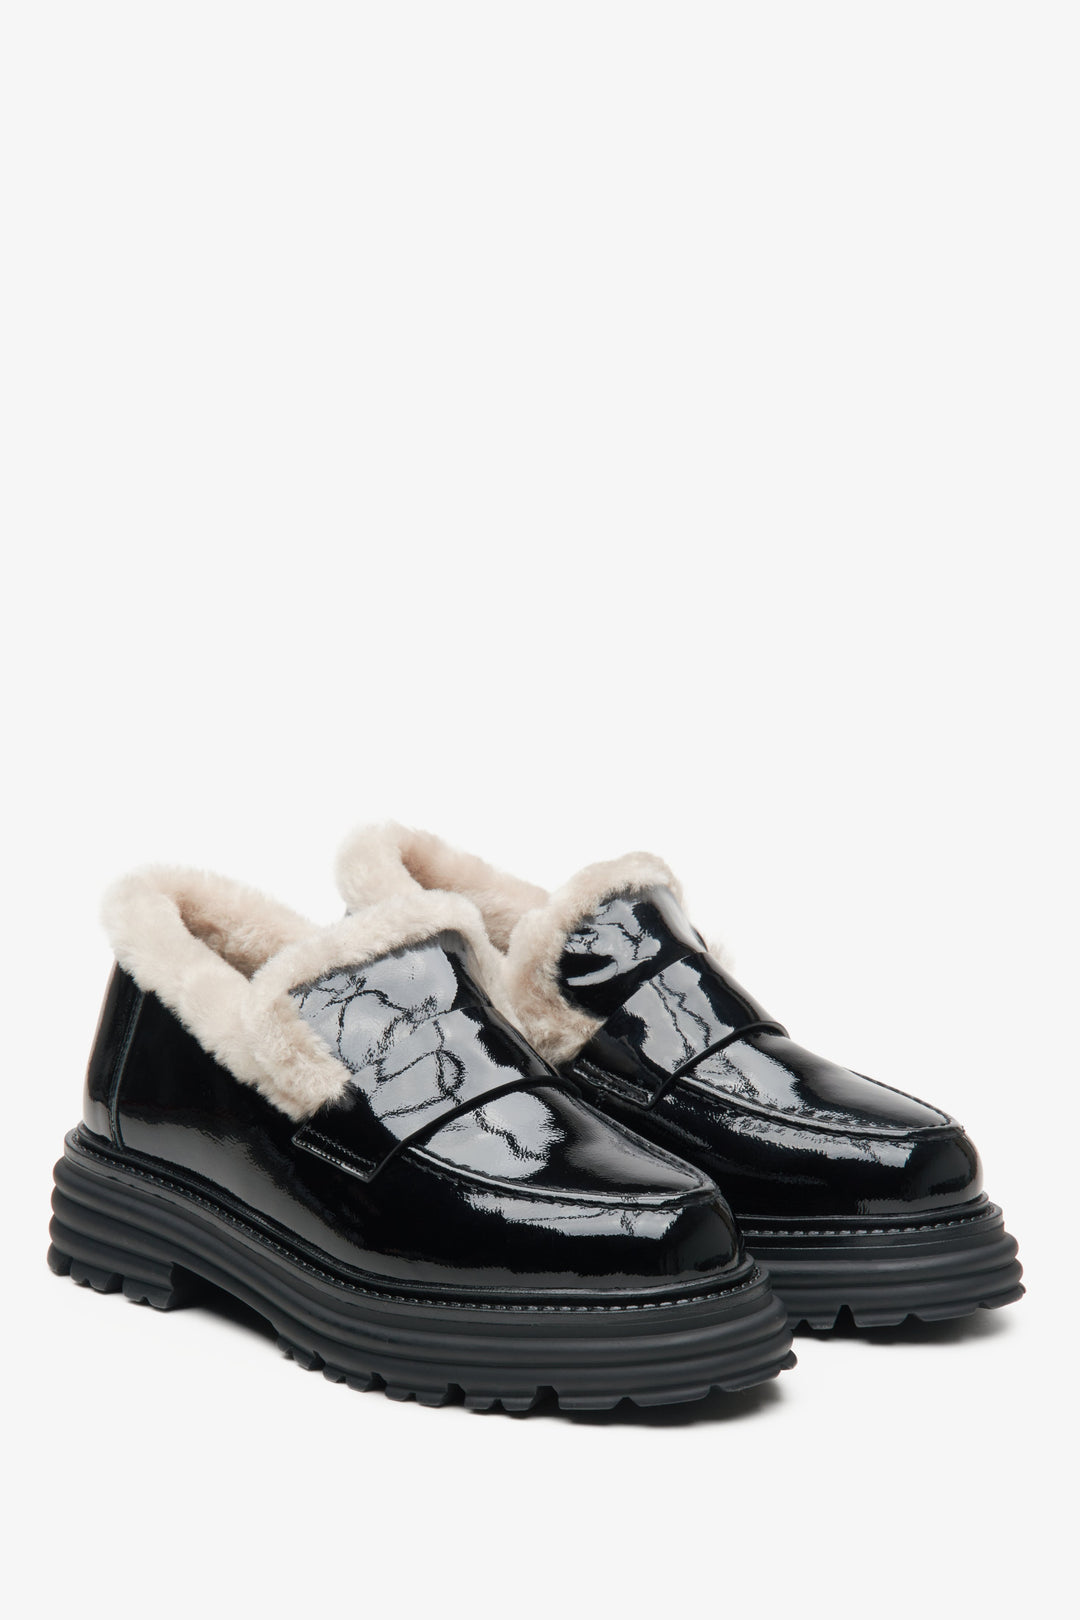 Winter women's moccasins in black with fur lining by Estro.